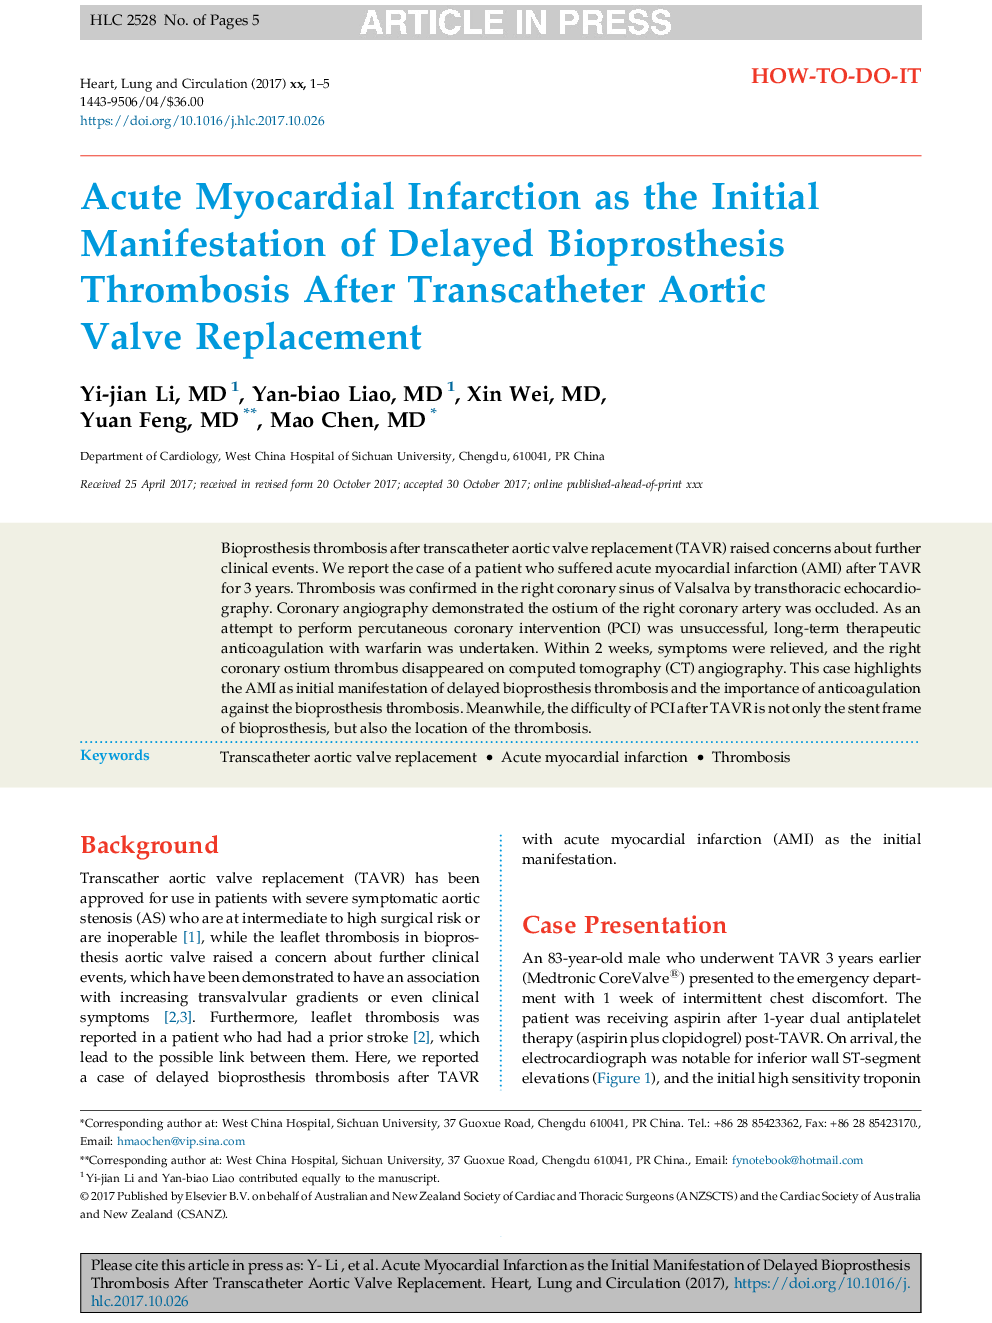 Acute Myocardial Infarction as the Initial Manifestation of Delayed Bioprosthesis Thrombosis After Transcatheter Aortic Valve Replacement